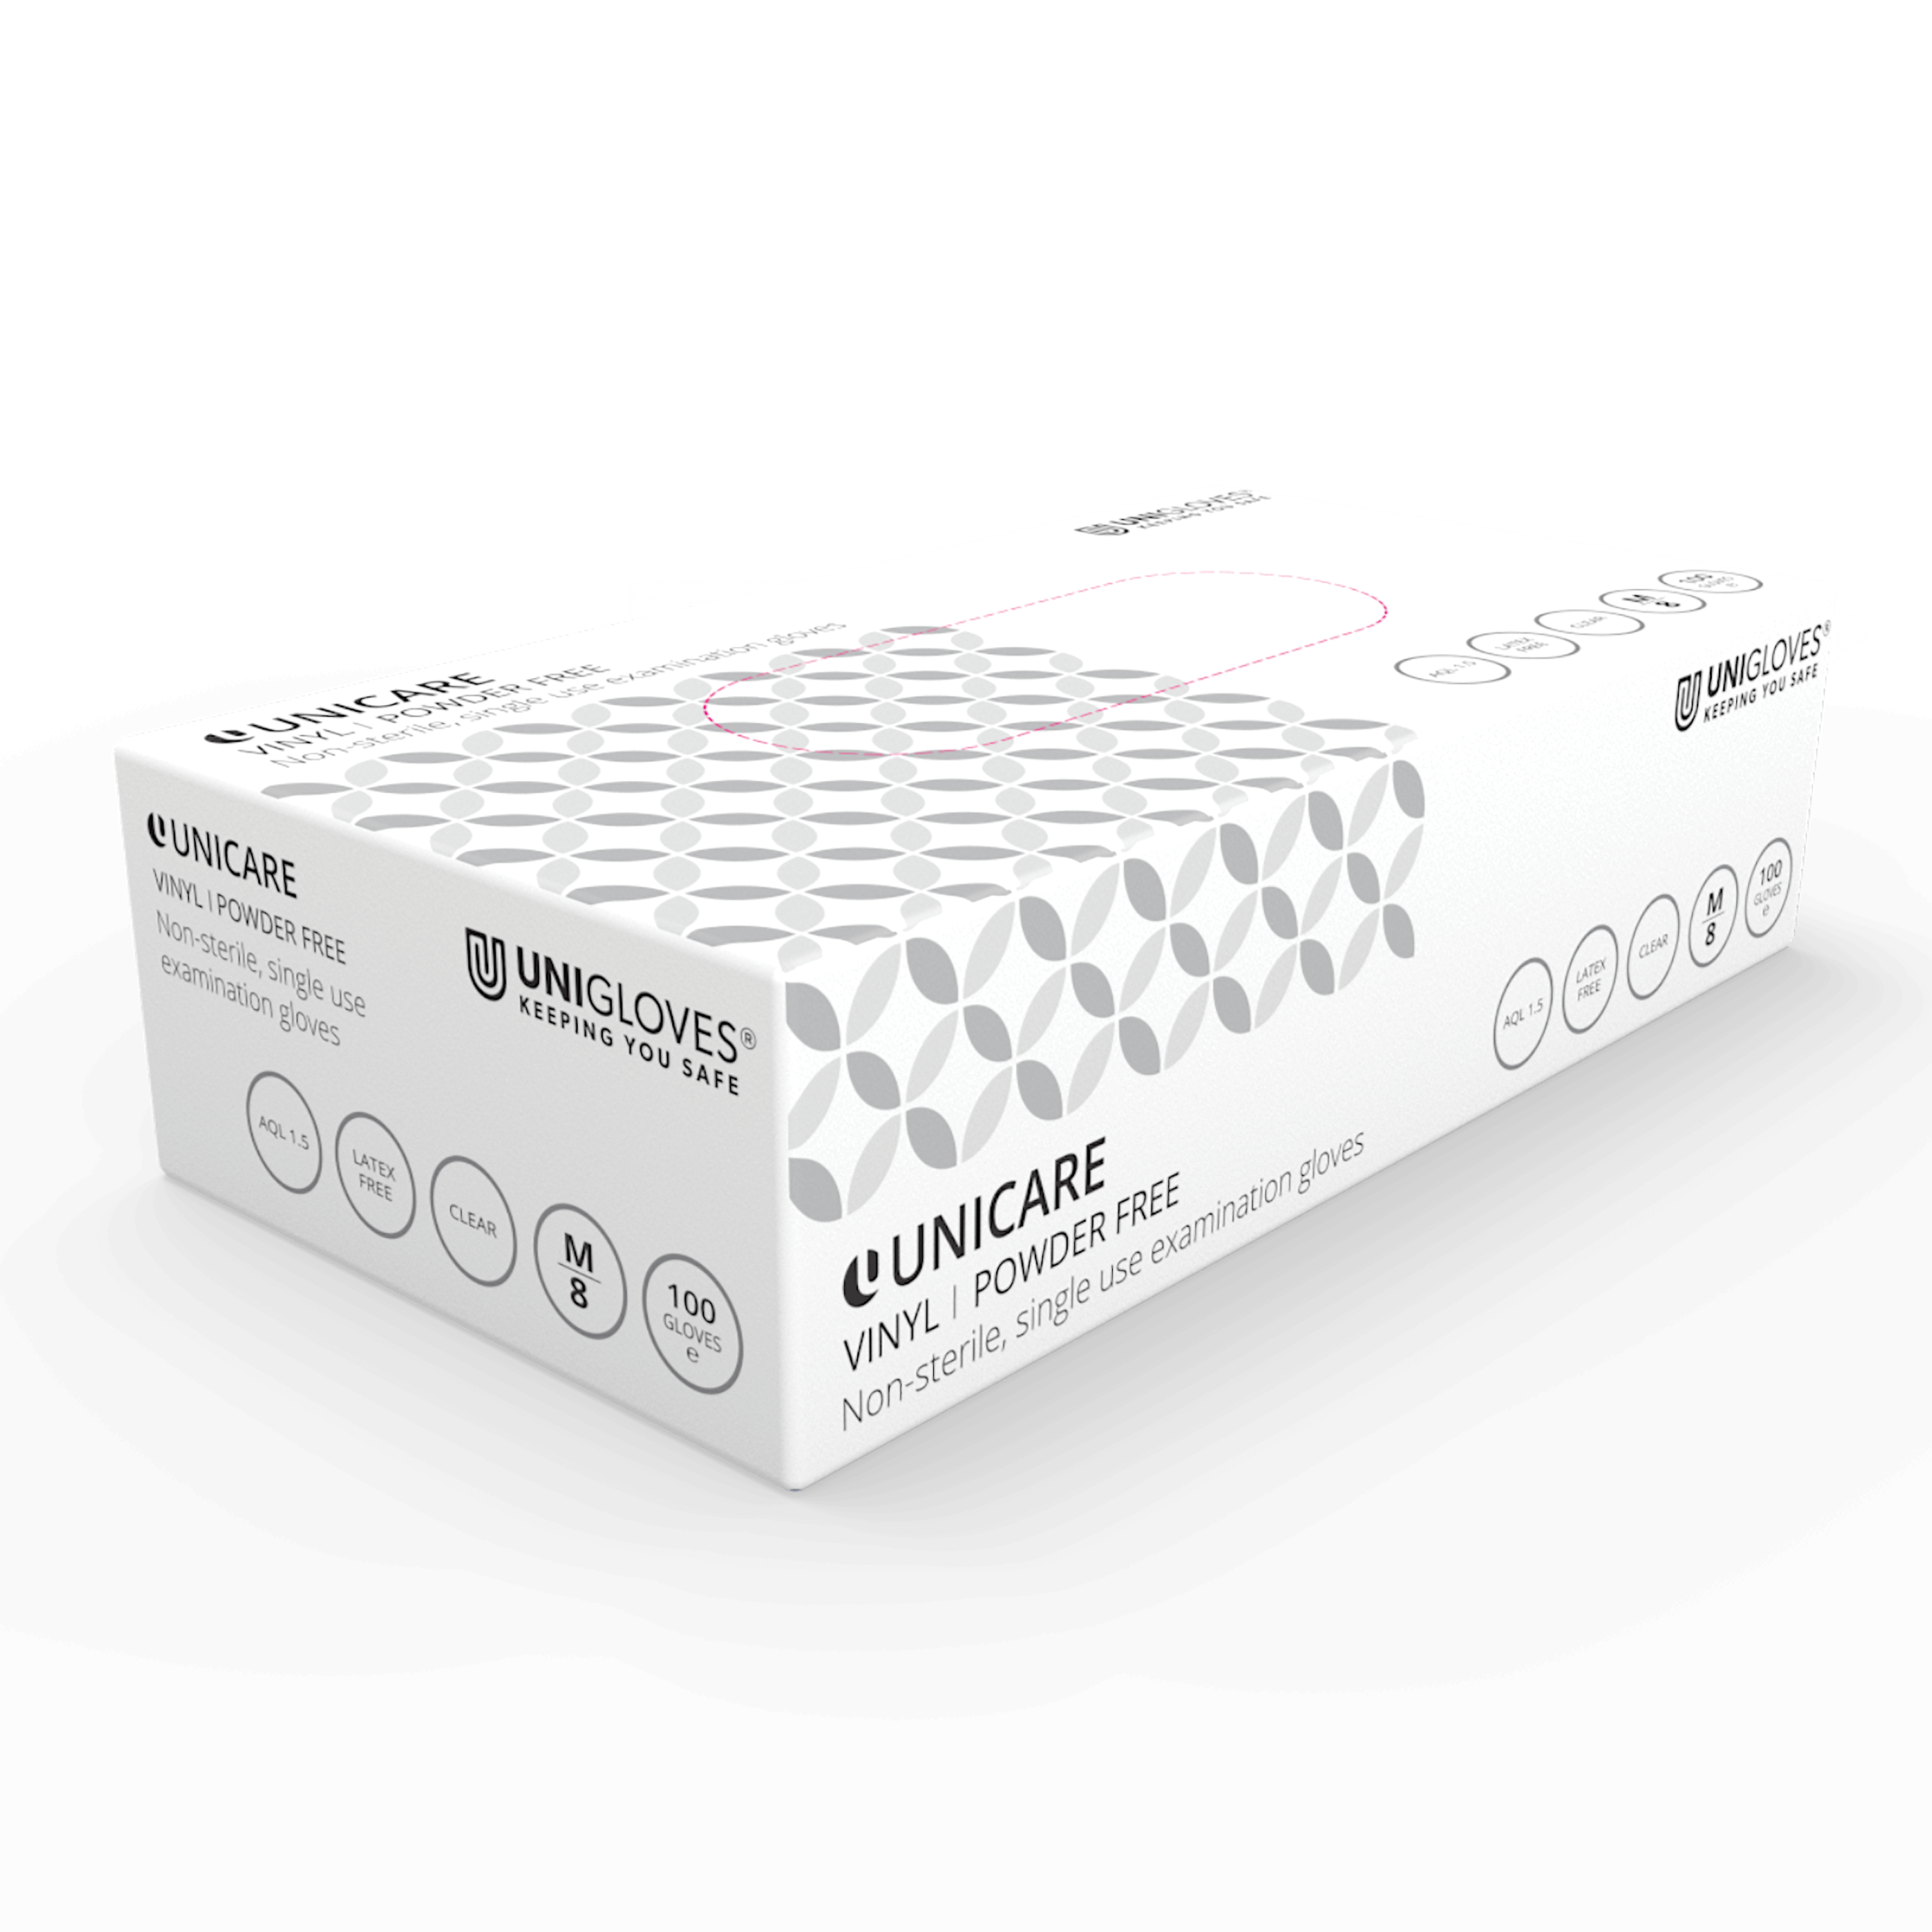 Unicare Clear Vinyl Small  Powder-Free Vinyl Gloves  Cases of 10 Boxes, 100 Gloves per Box